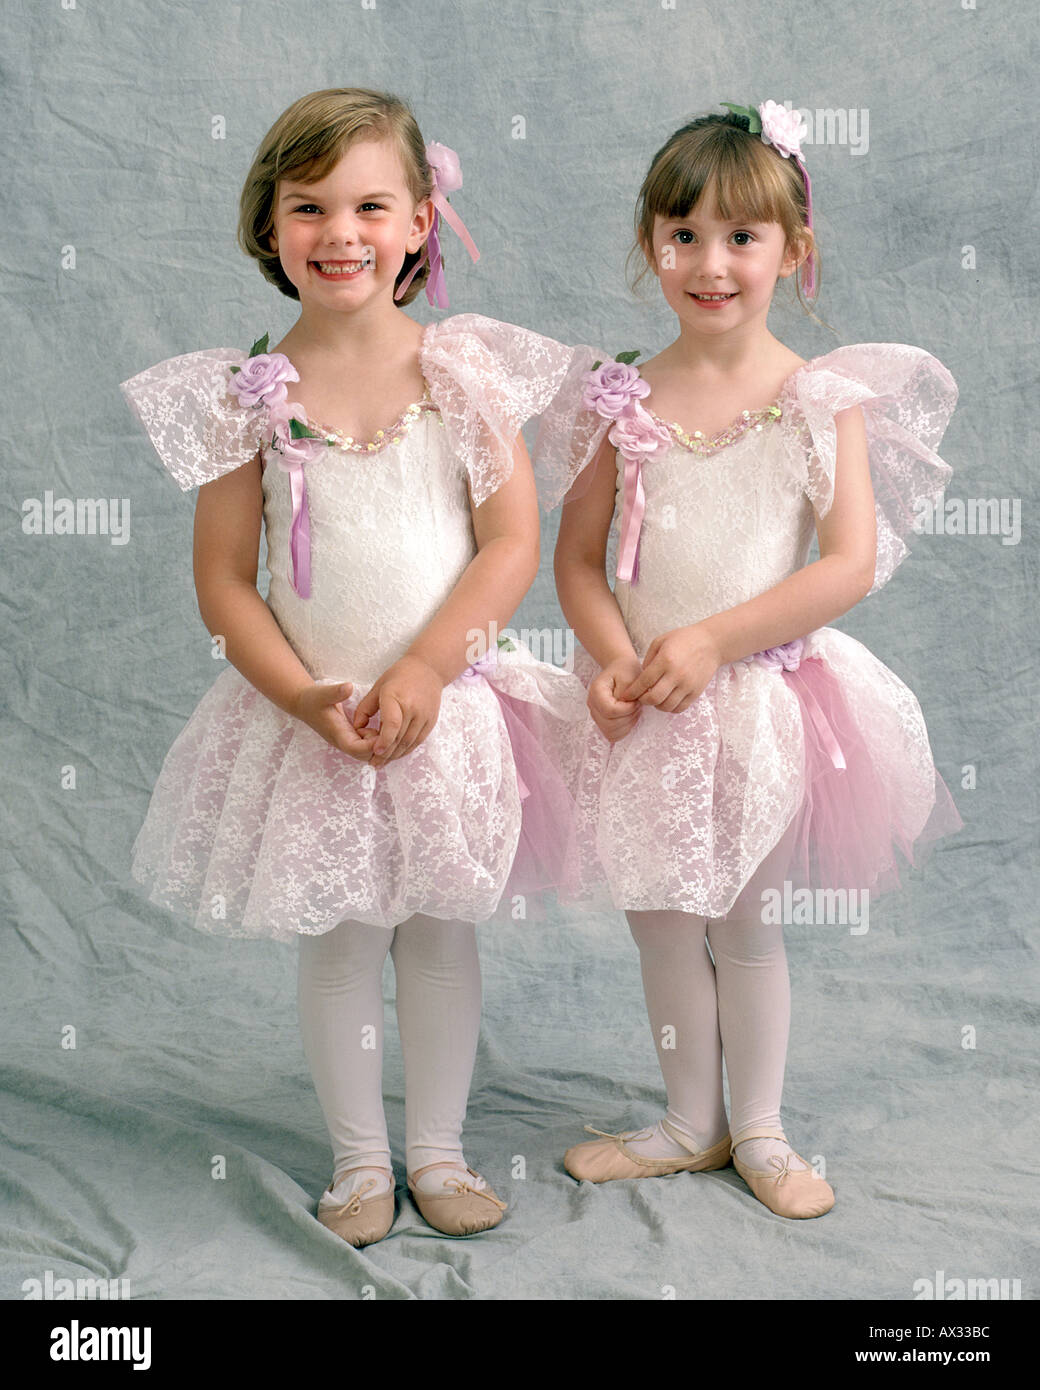 Sarah and Hannah Dressed for Dance Recital Stock Photo